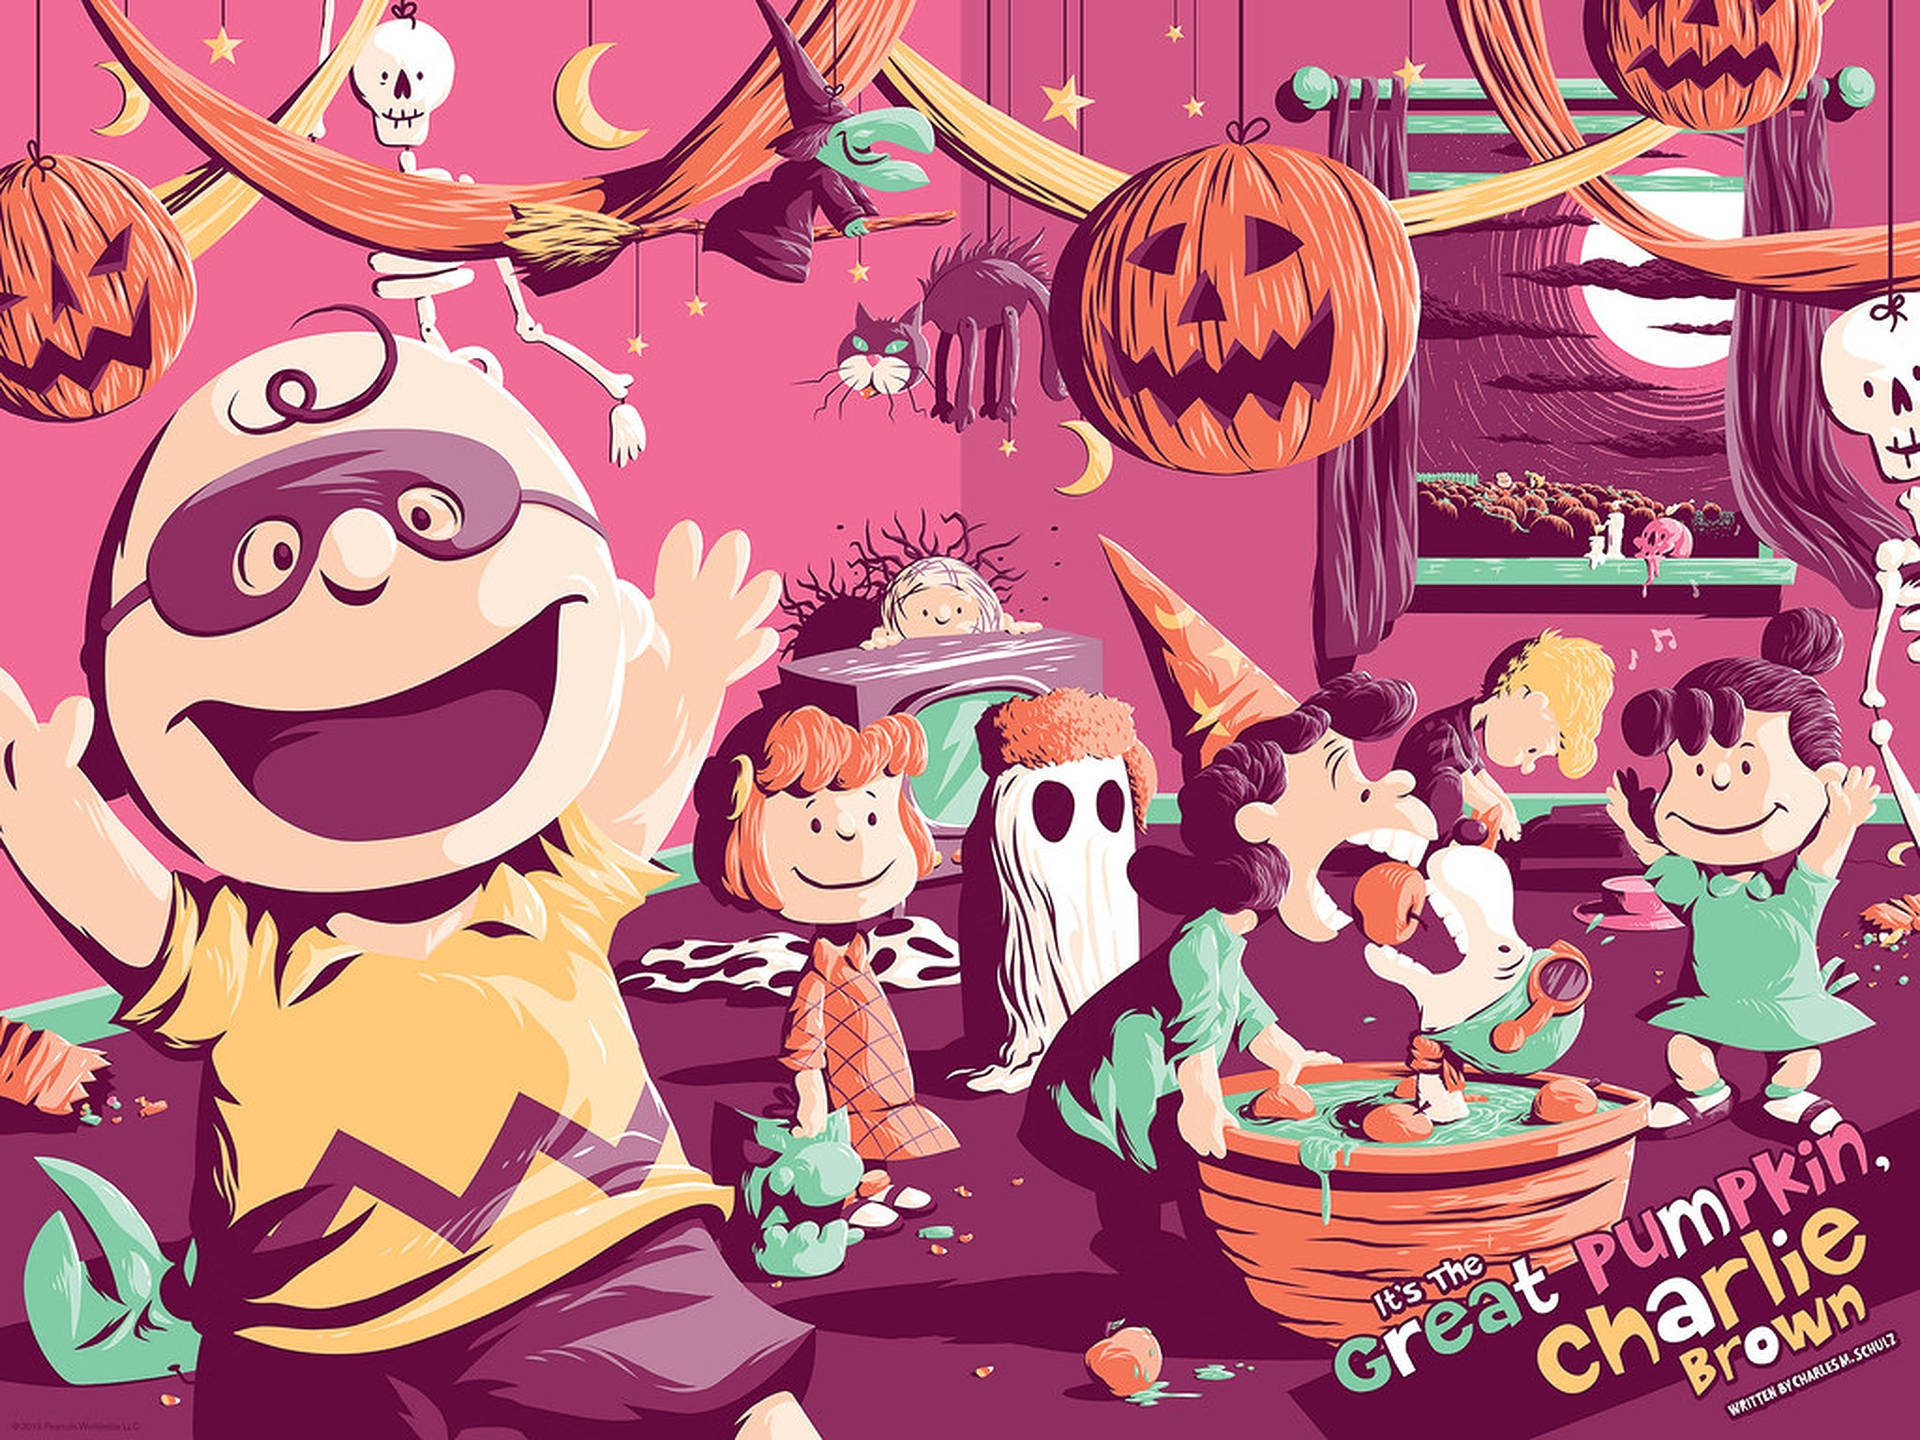 Charlie Brown Pink Halloween Party Wallpaper